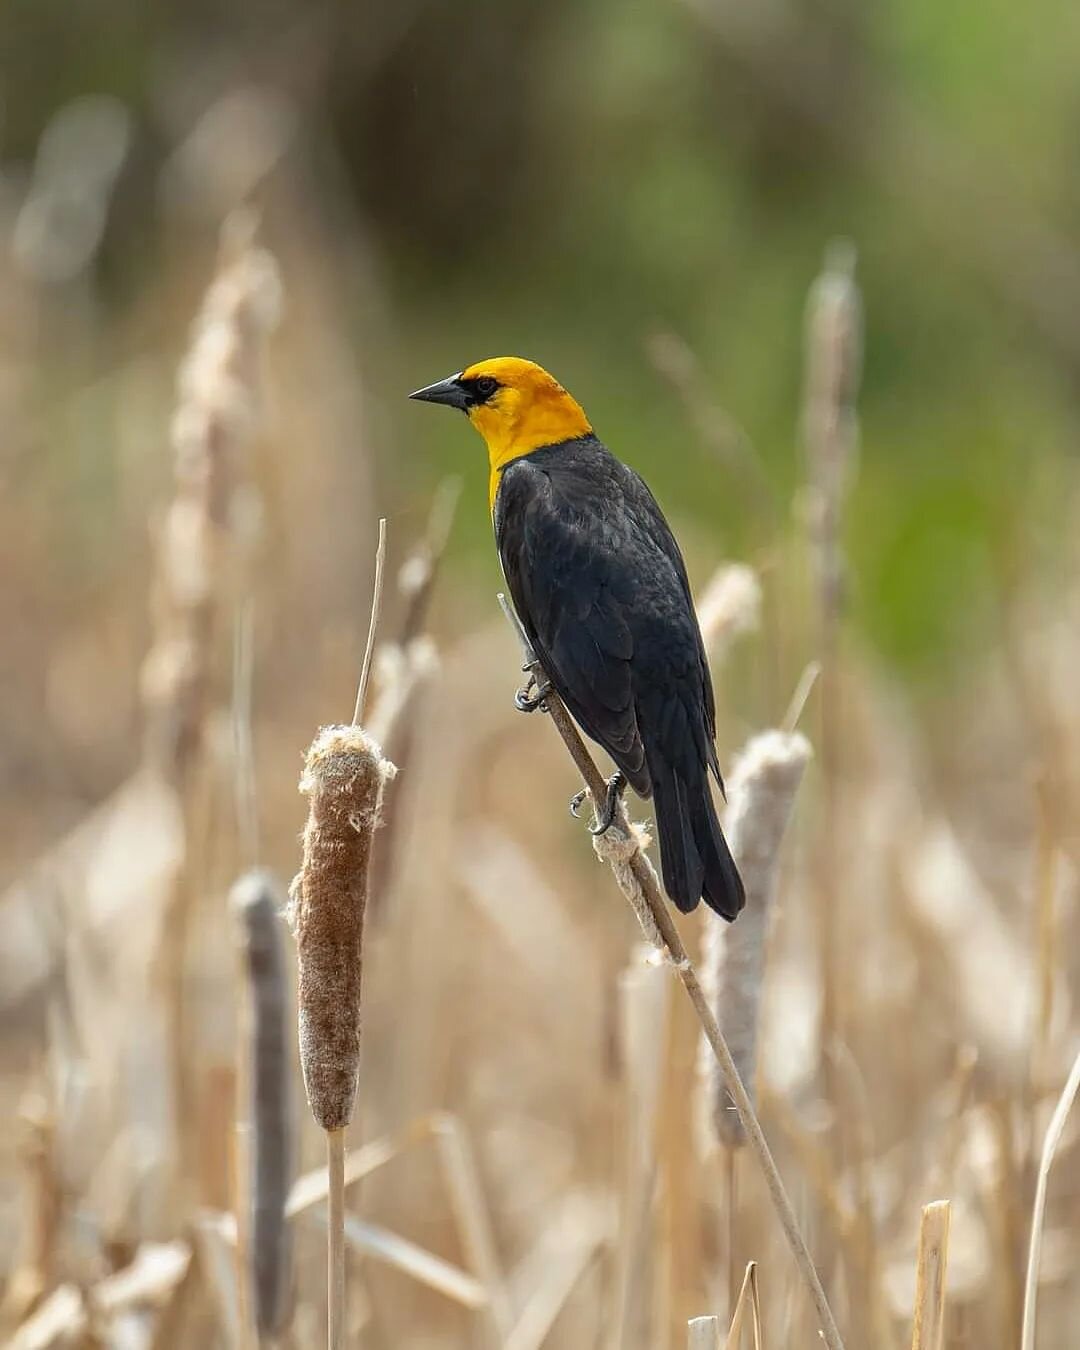 Have you seen this guy on the garden cam lately? He sure has a strong presence, the Red-Winged Blackbird leave him alone. #yellowheadedblackbird #birdingphotography